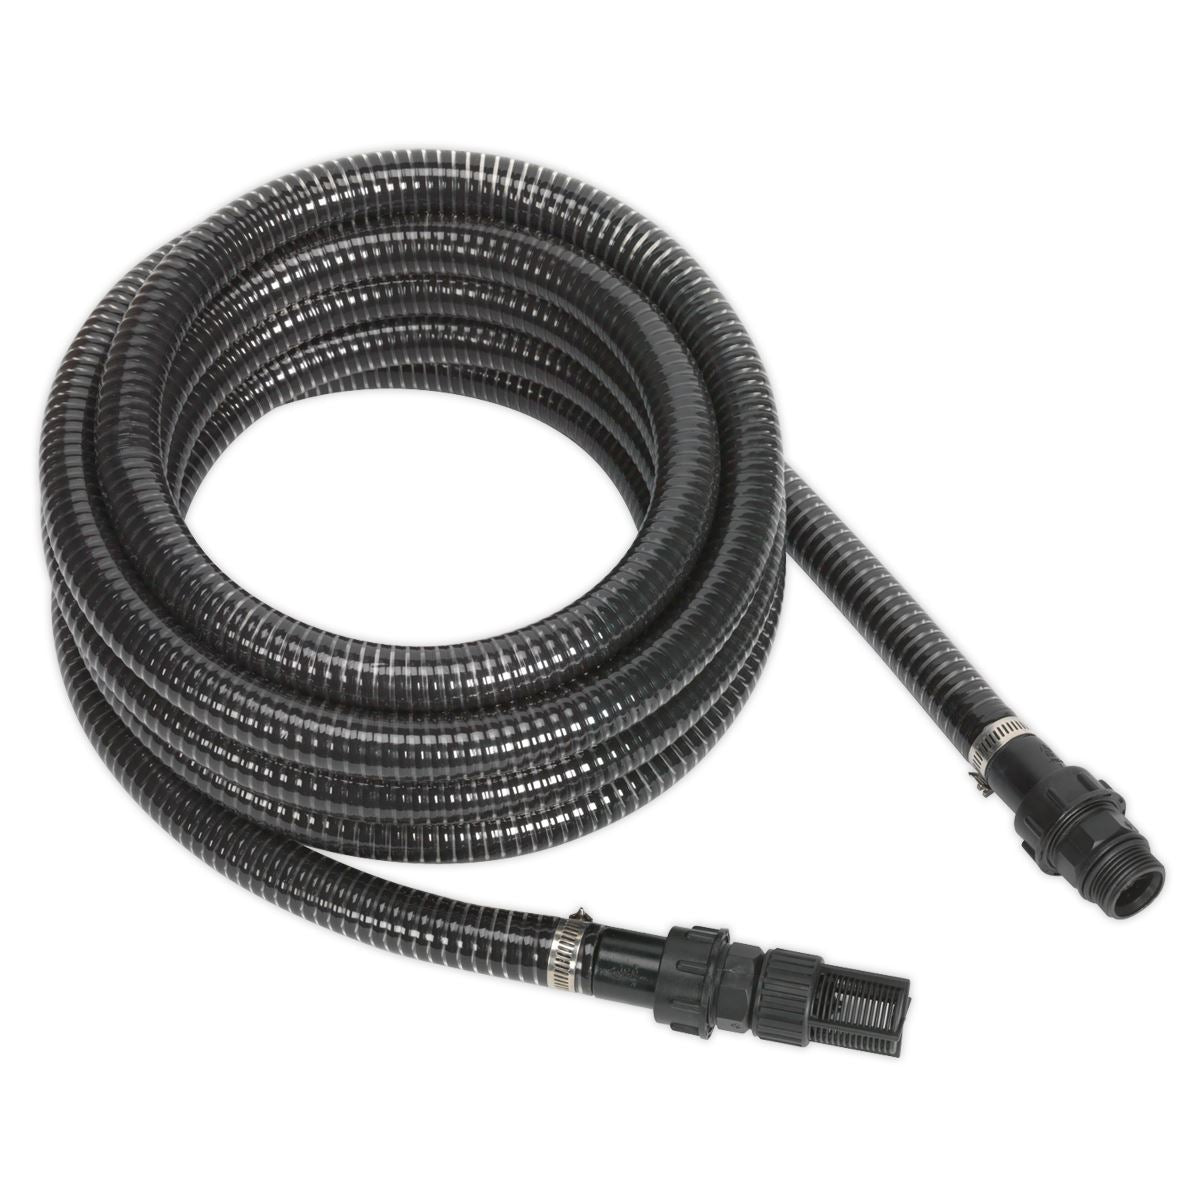 Sealey Solid Wall Suction Hose - Ø25mm x 7m